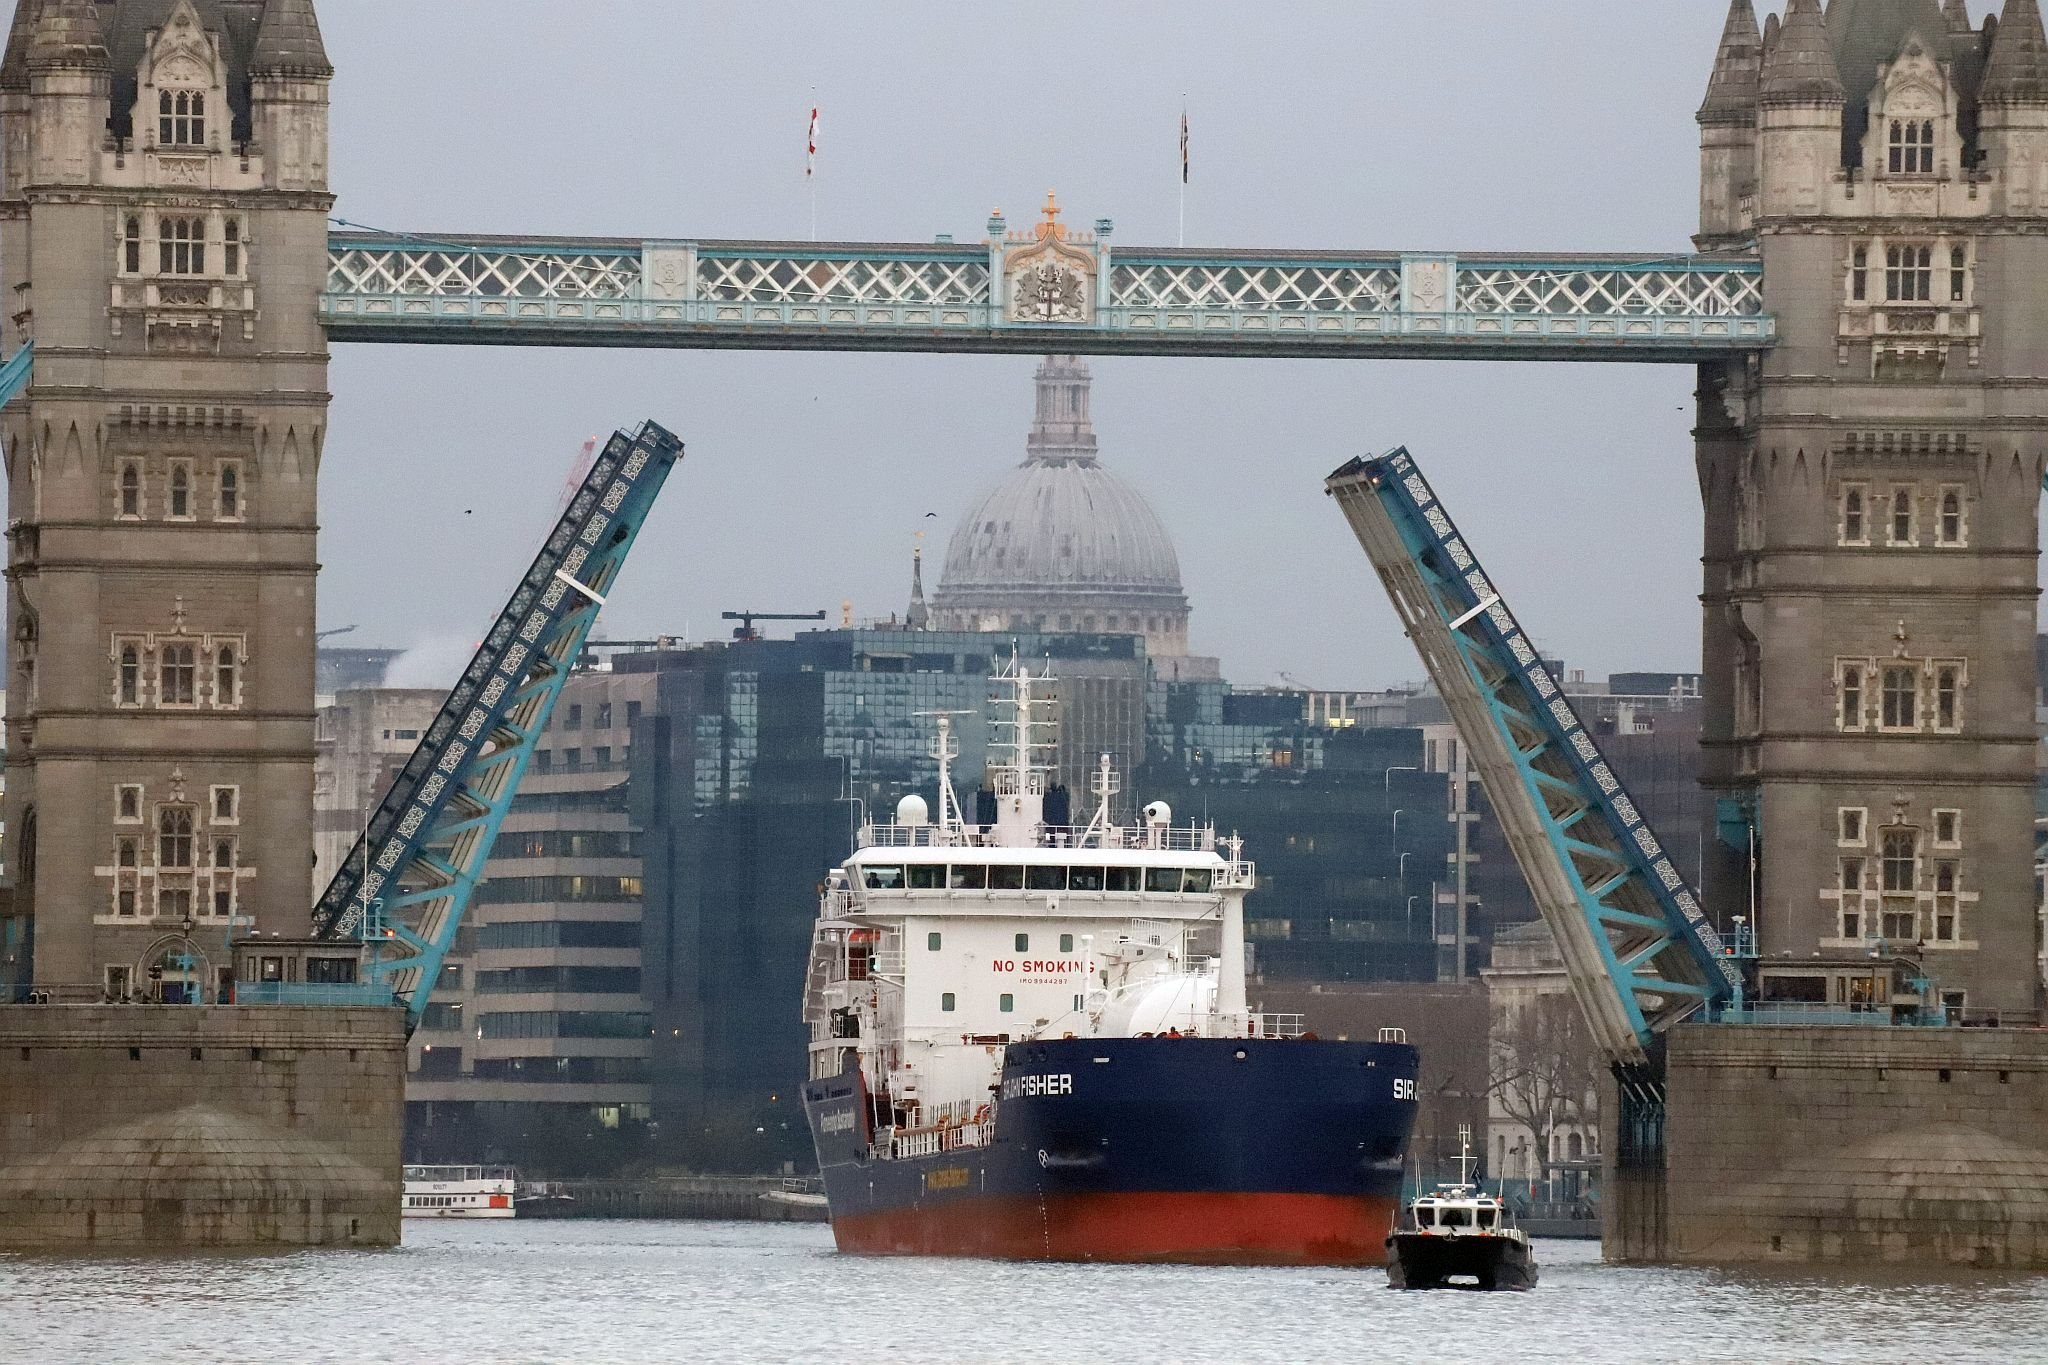 Chemical Tanker “Sir John Fisher”, owned by James Fisher, leaves central London on 29-Mar-2023 and passes downstream on the River Thames through Tower Bridge.